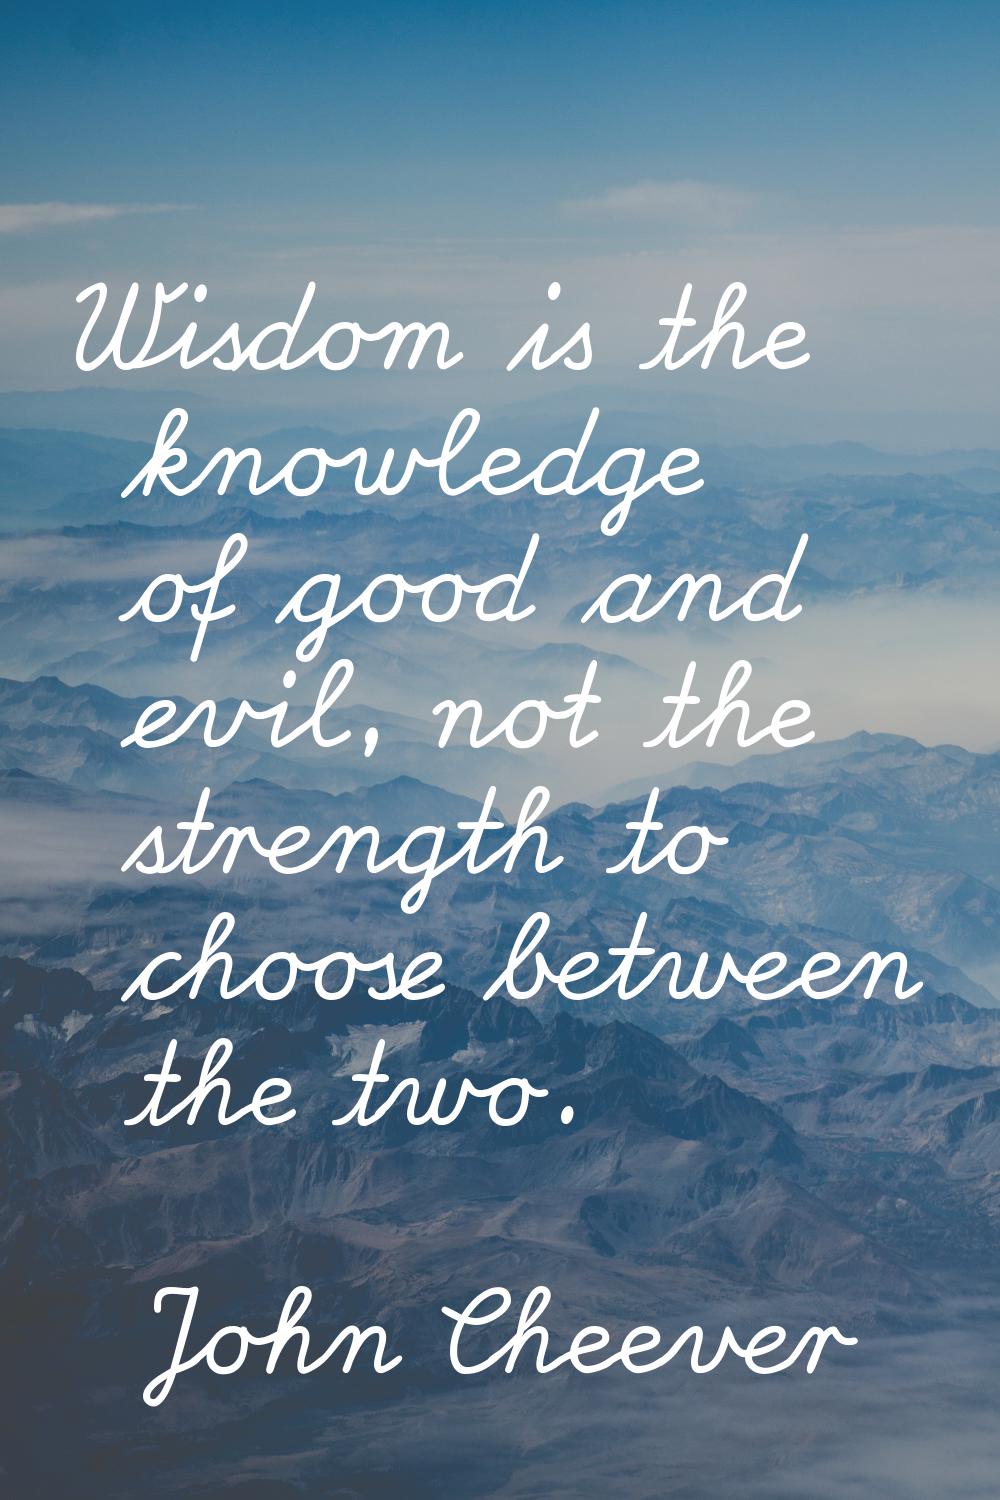 Wisdom is the knowledge of good and evil, not the strength to choose between the two.